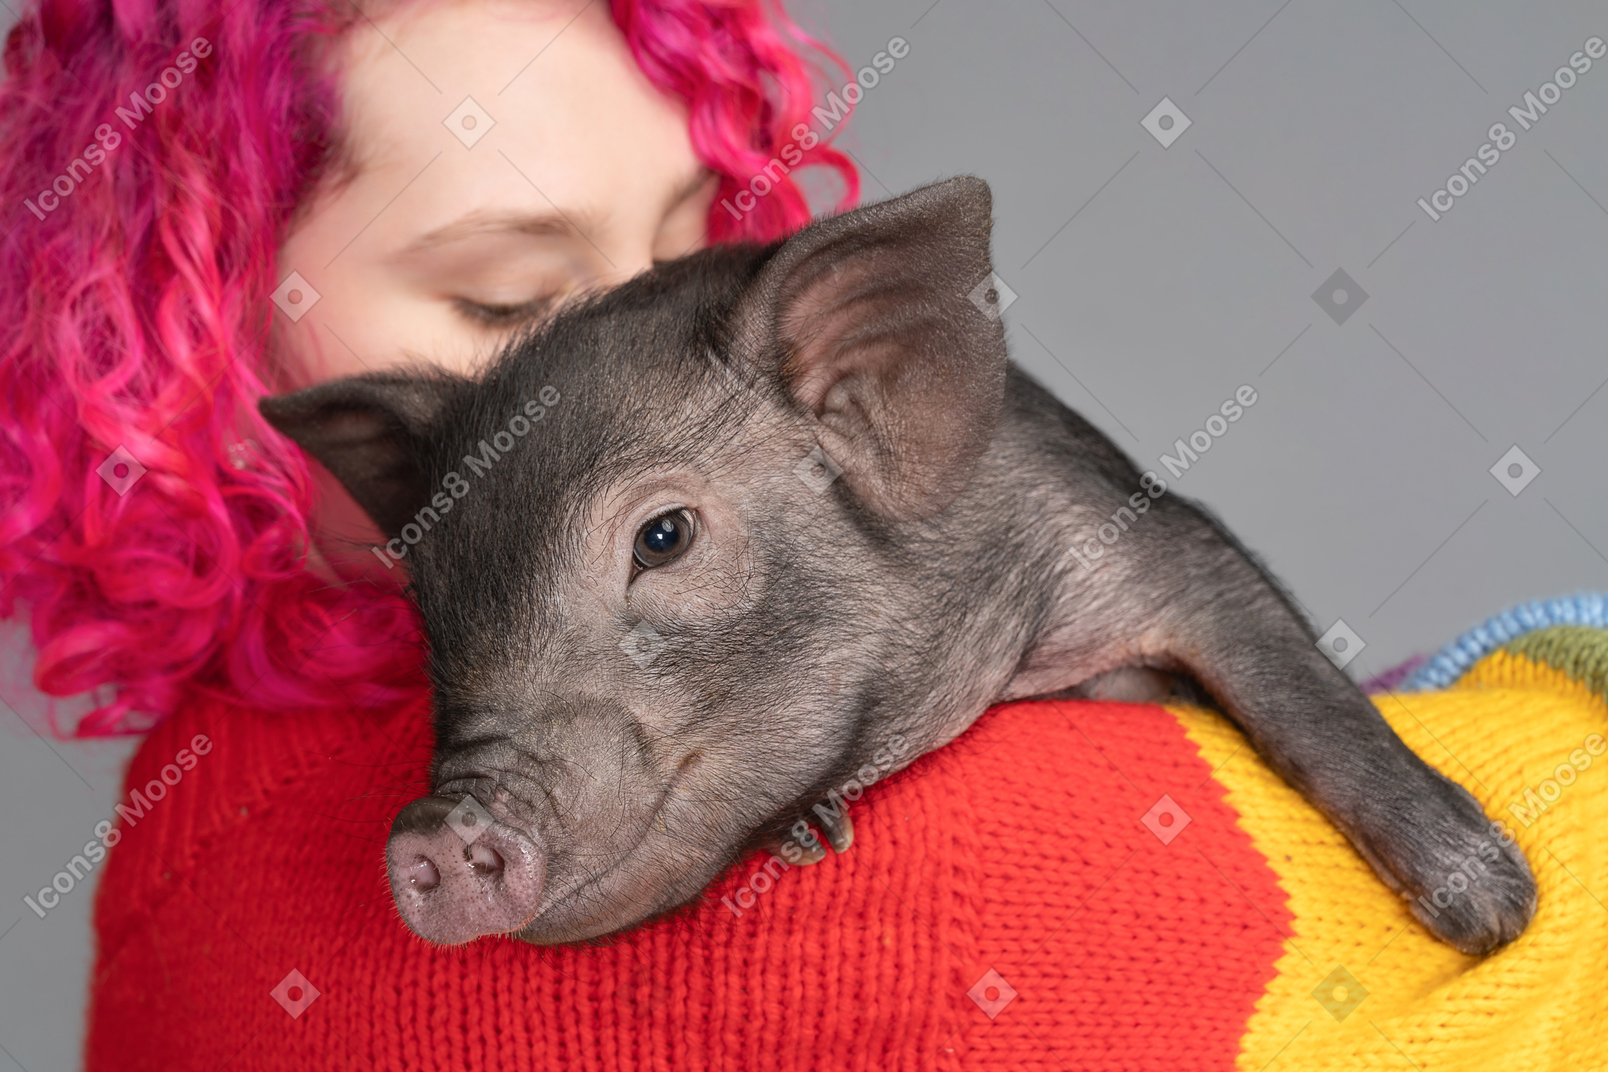 Pink haired female holding a little piglet